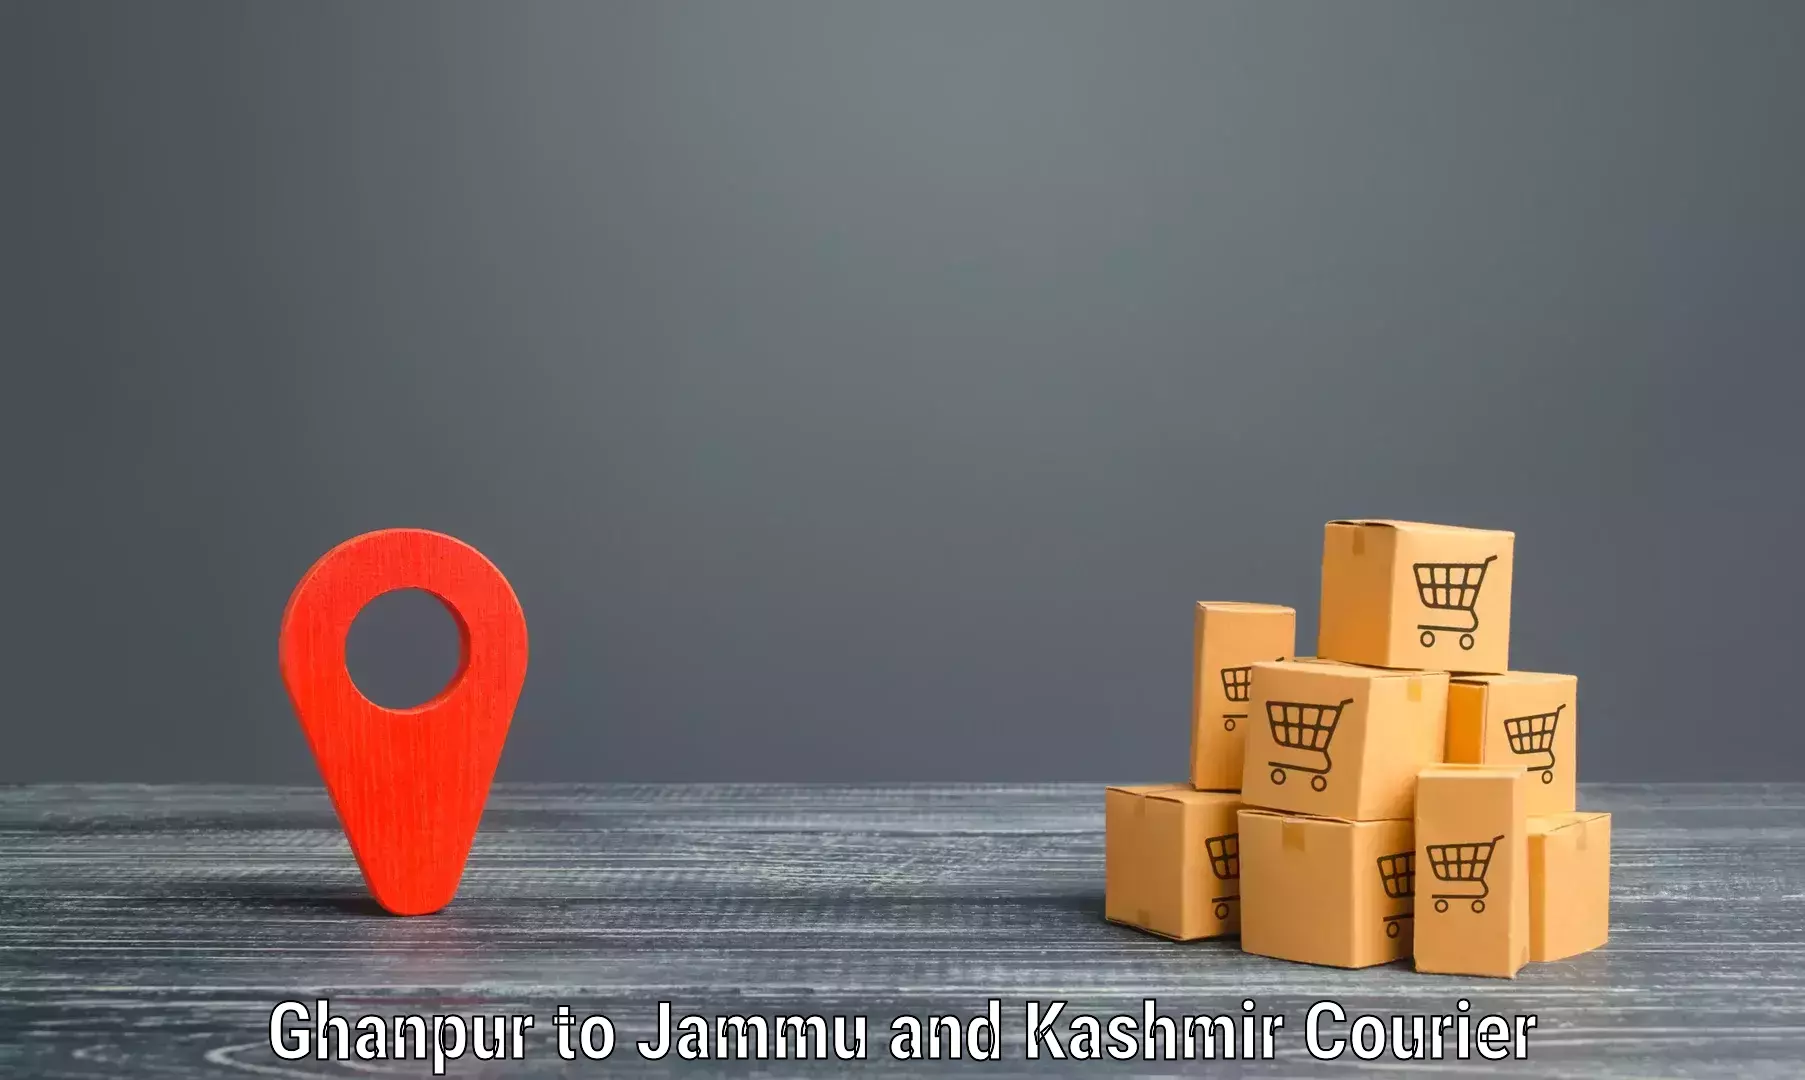 Supply chain efficiency in Ghanpur to Rajouri